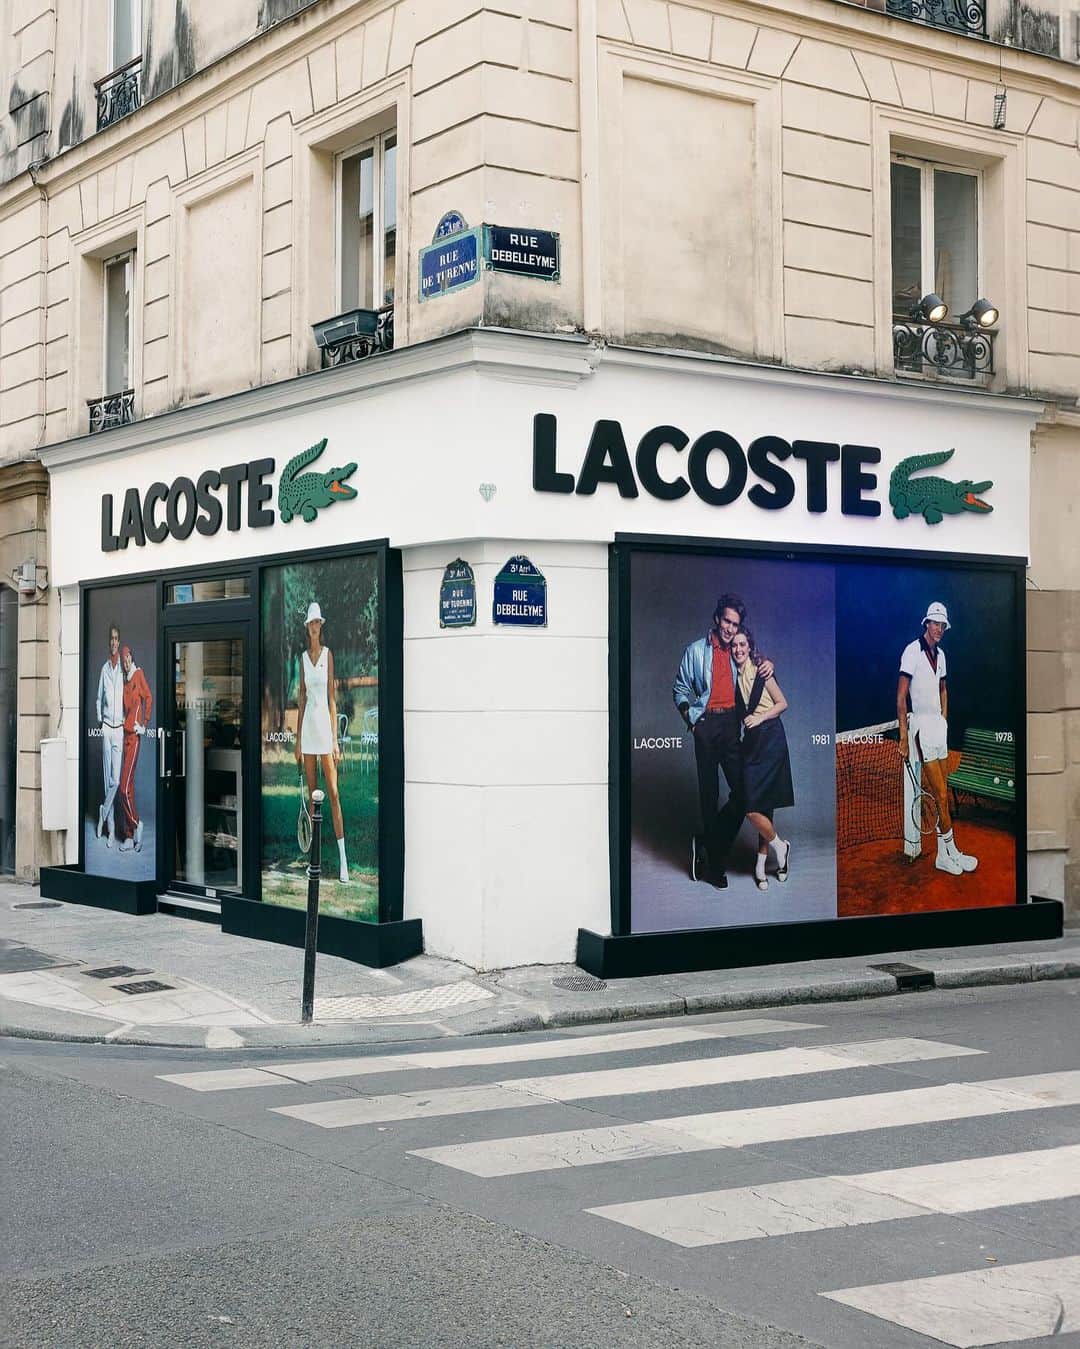 Lacosteのインスタグラム：「The 90 years celebration continues during Paris Fashion Week at the Lacoste Vintage Shop 🐊 Find unique vintage clothes, girolles cap reeditions and deadstock pieces curated by @bleumode  New arrivals every day.  Open 29/30 sept - 83 rue de Turenne 📍 Paris.  12-8 pm - free entrance.」